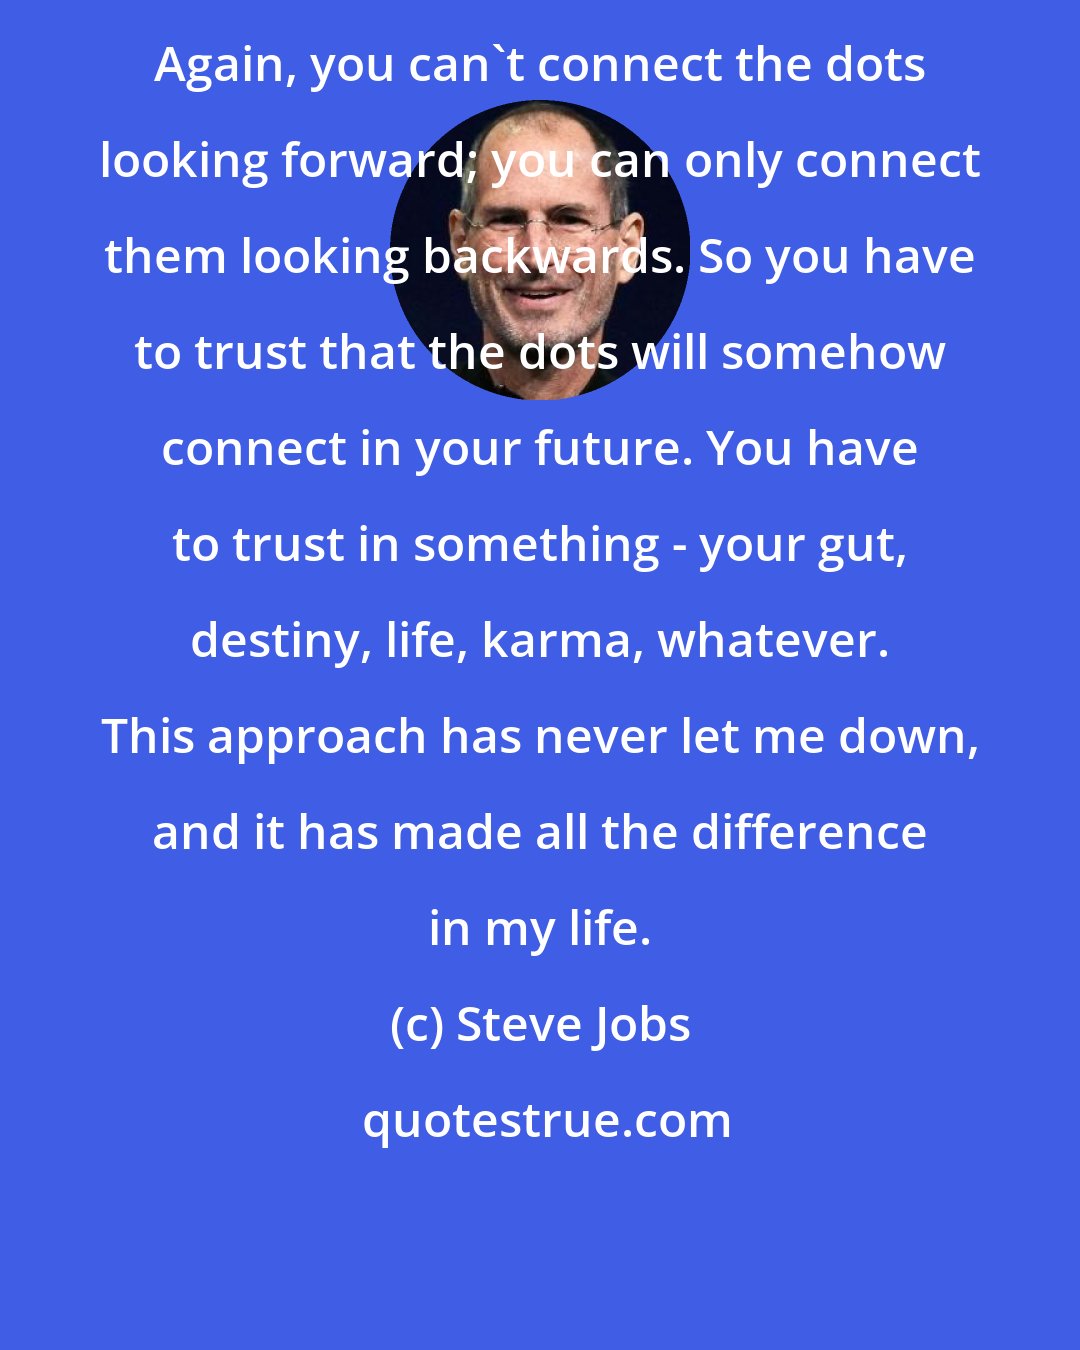 Steve Jobs: Again, you can't connect the dots looking forward; you can only connect them looking backwards. So you have to trust that the dots will somehow connect in your future. You have to trust in something - your gut, destiny, life, karma, whatever. This approach has never let me down, and it has made all the difference in my life.